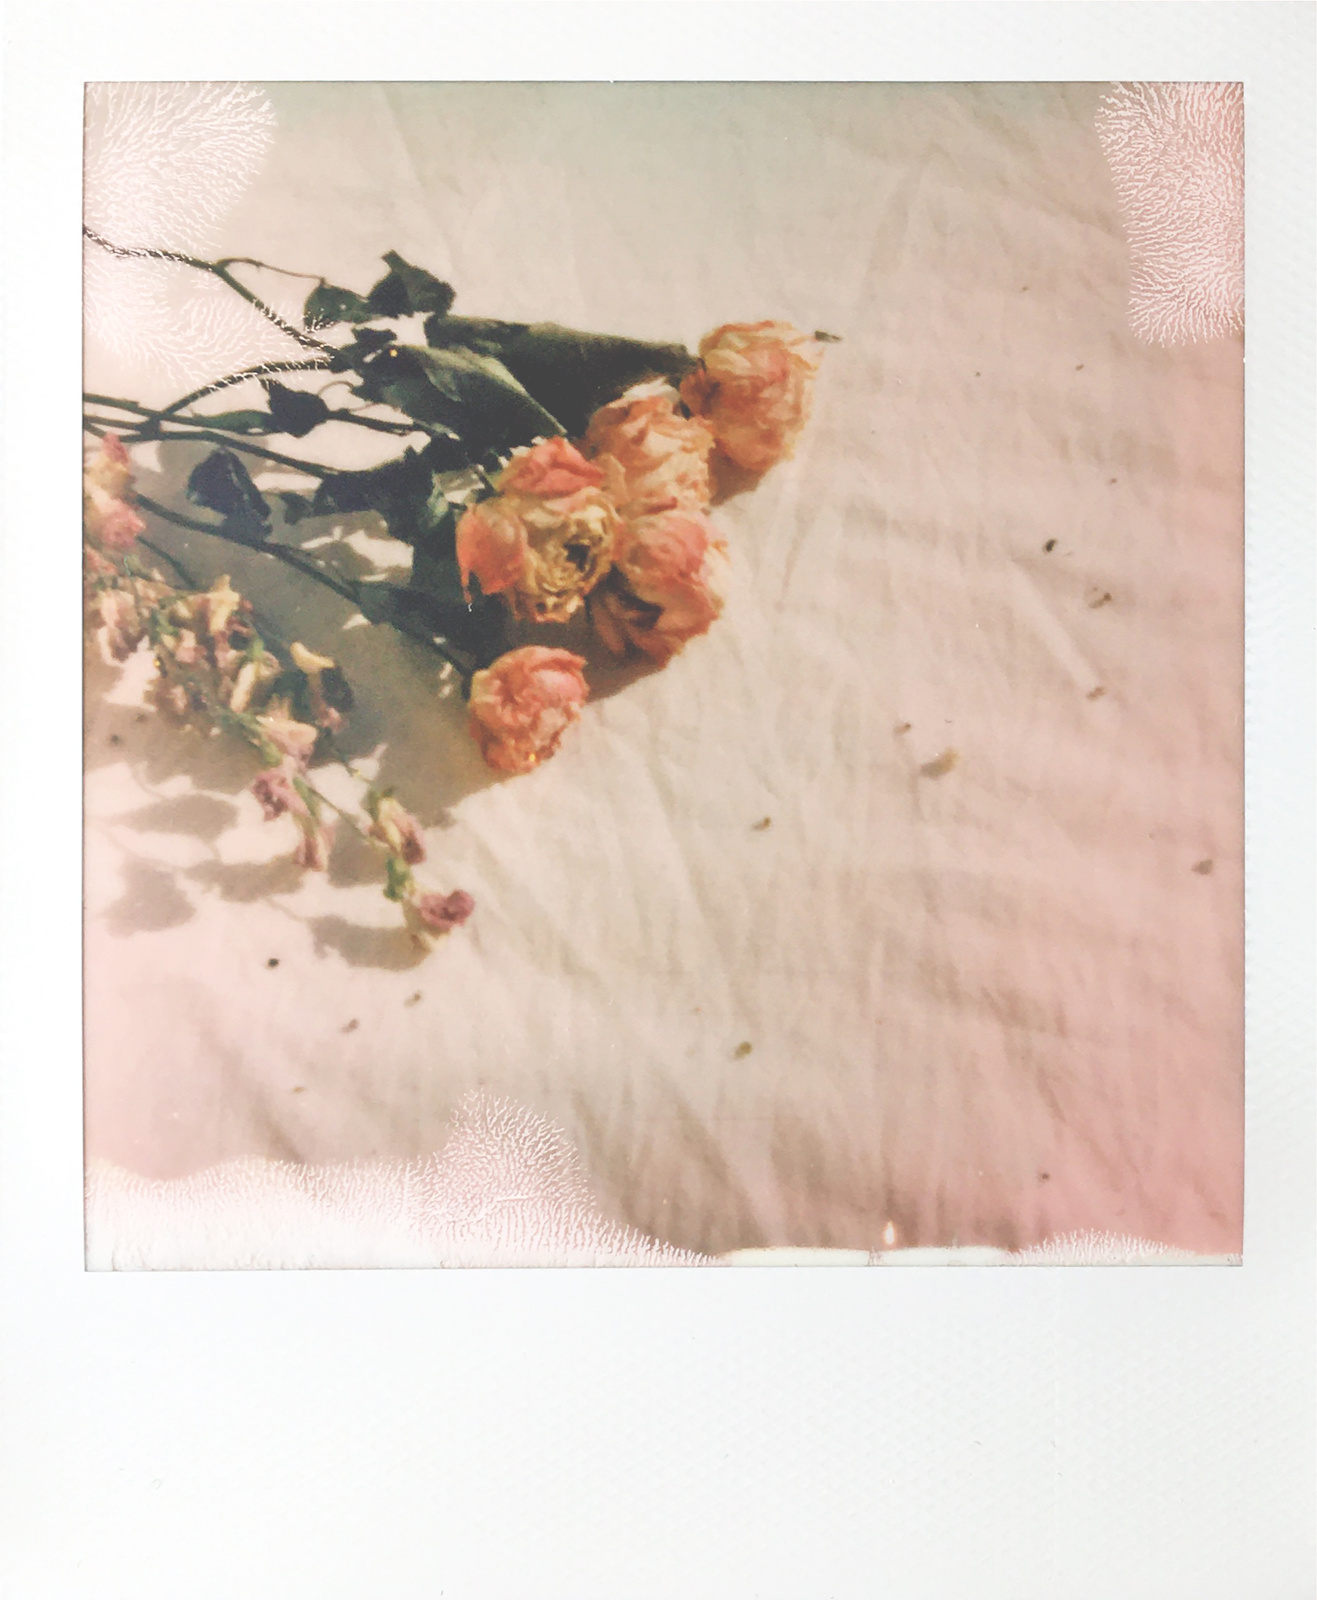 Instax Photo of Dried flowers on White Cloth